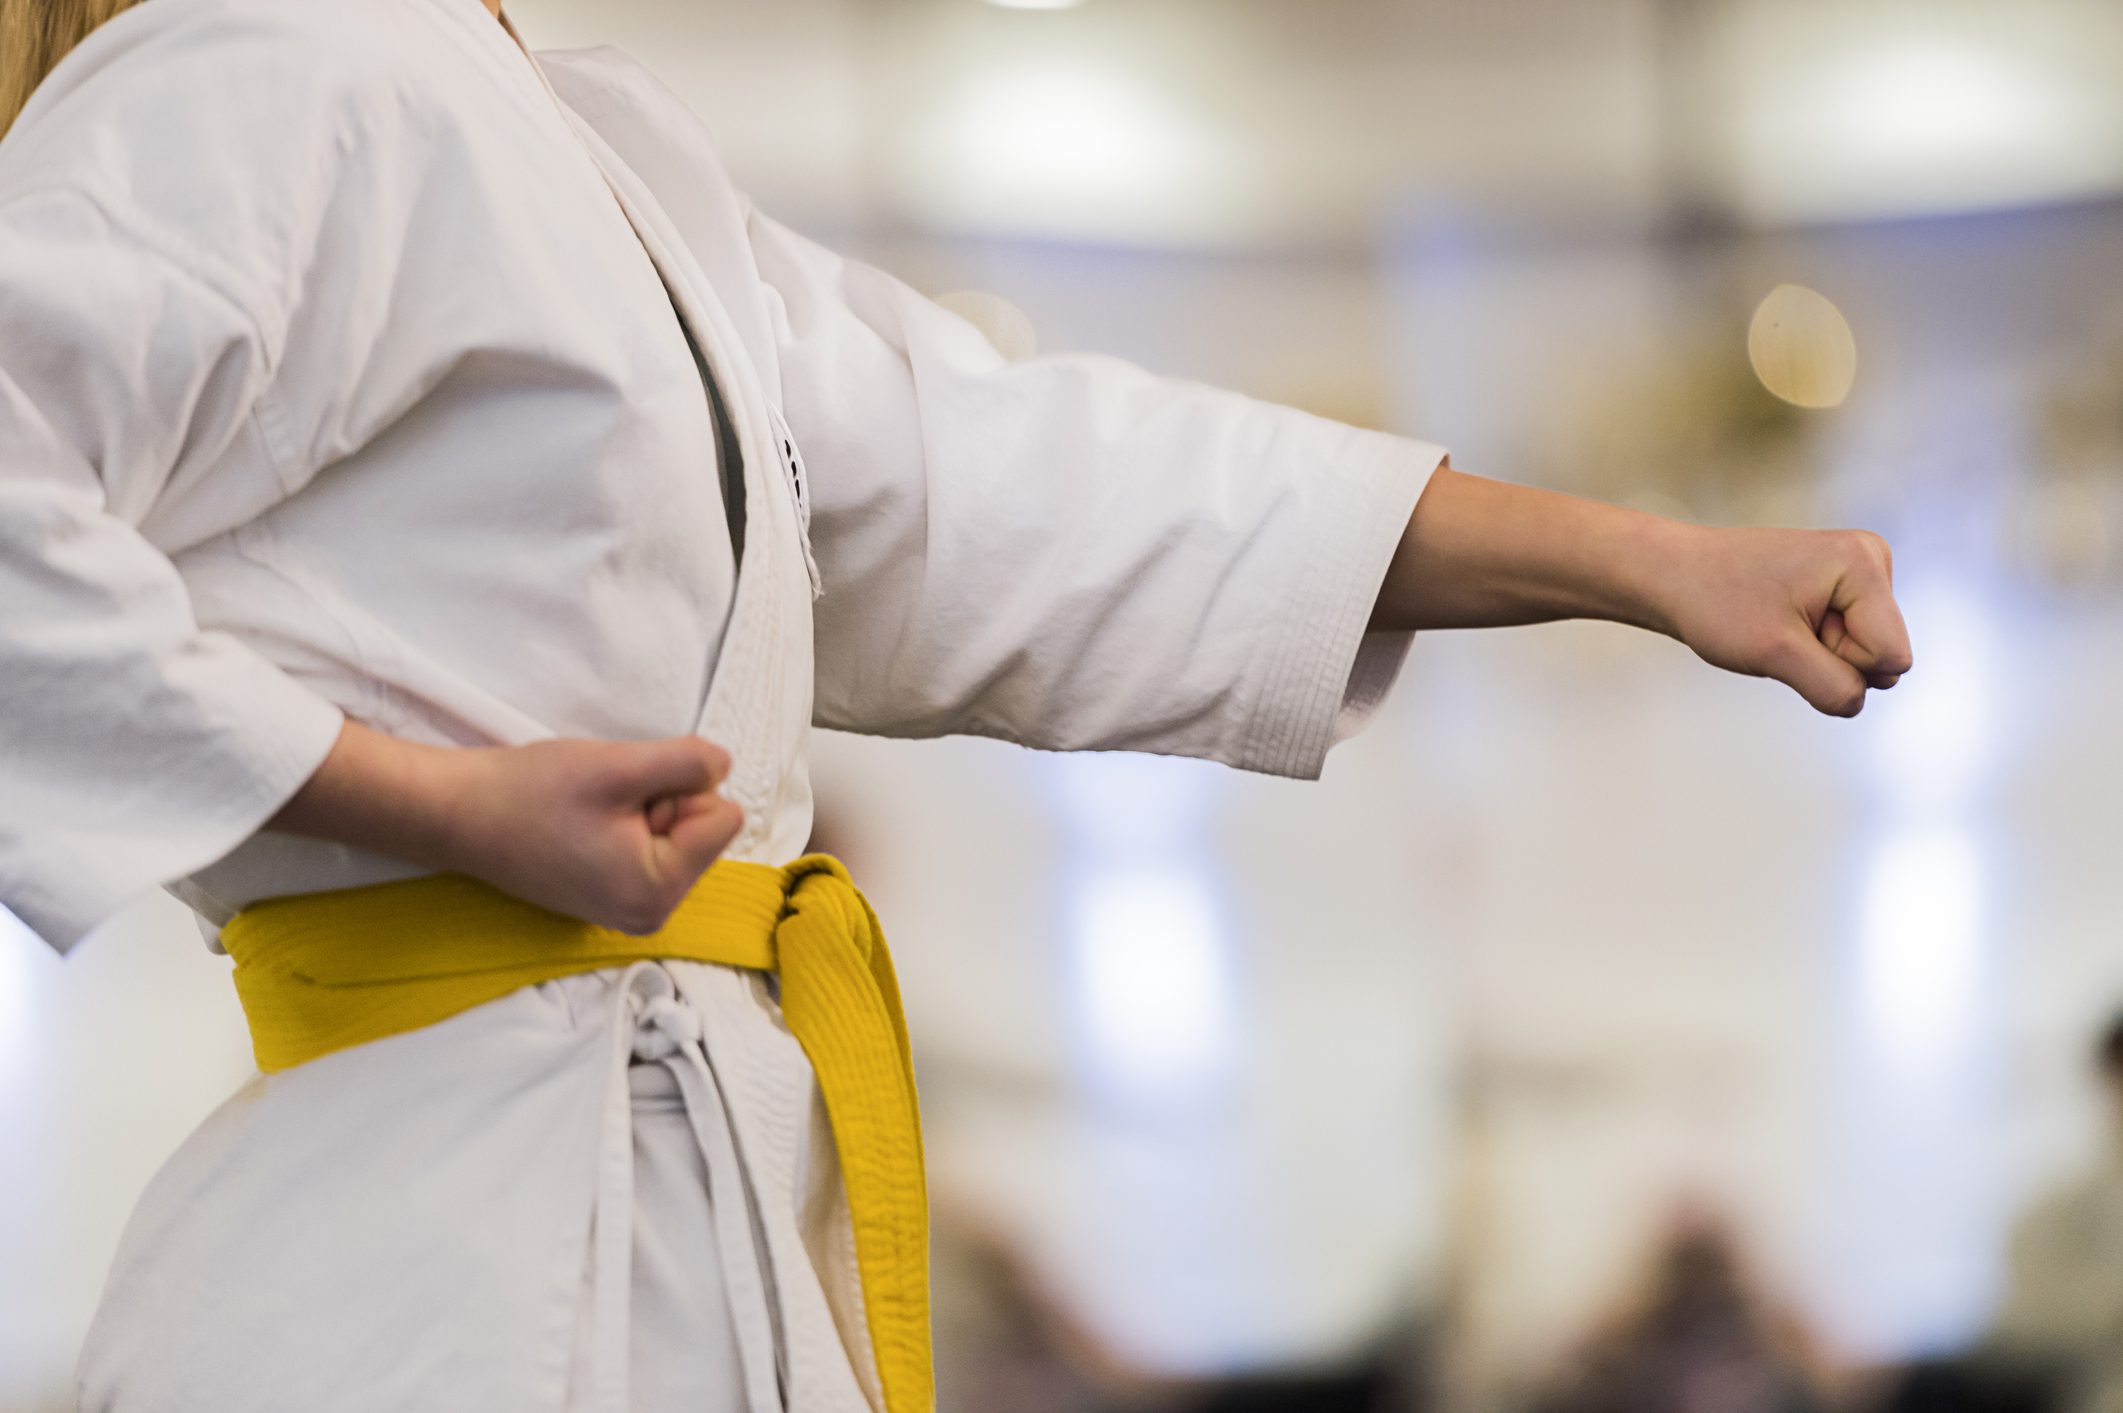 Karate training showing a firm hand-fighting technique.